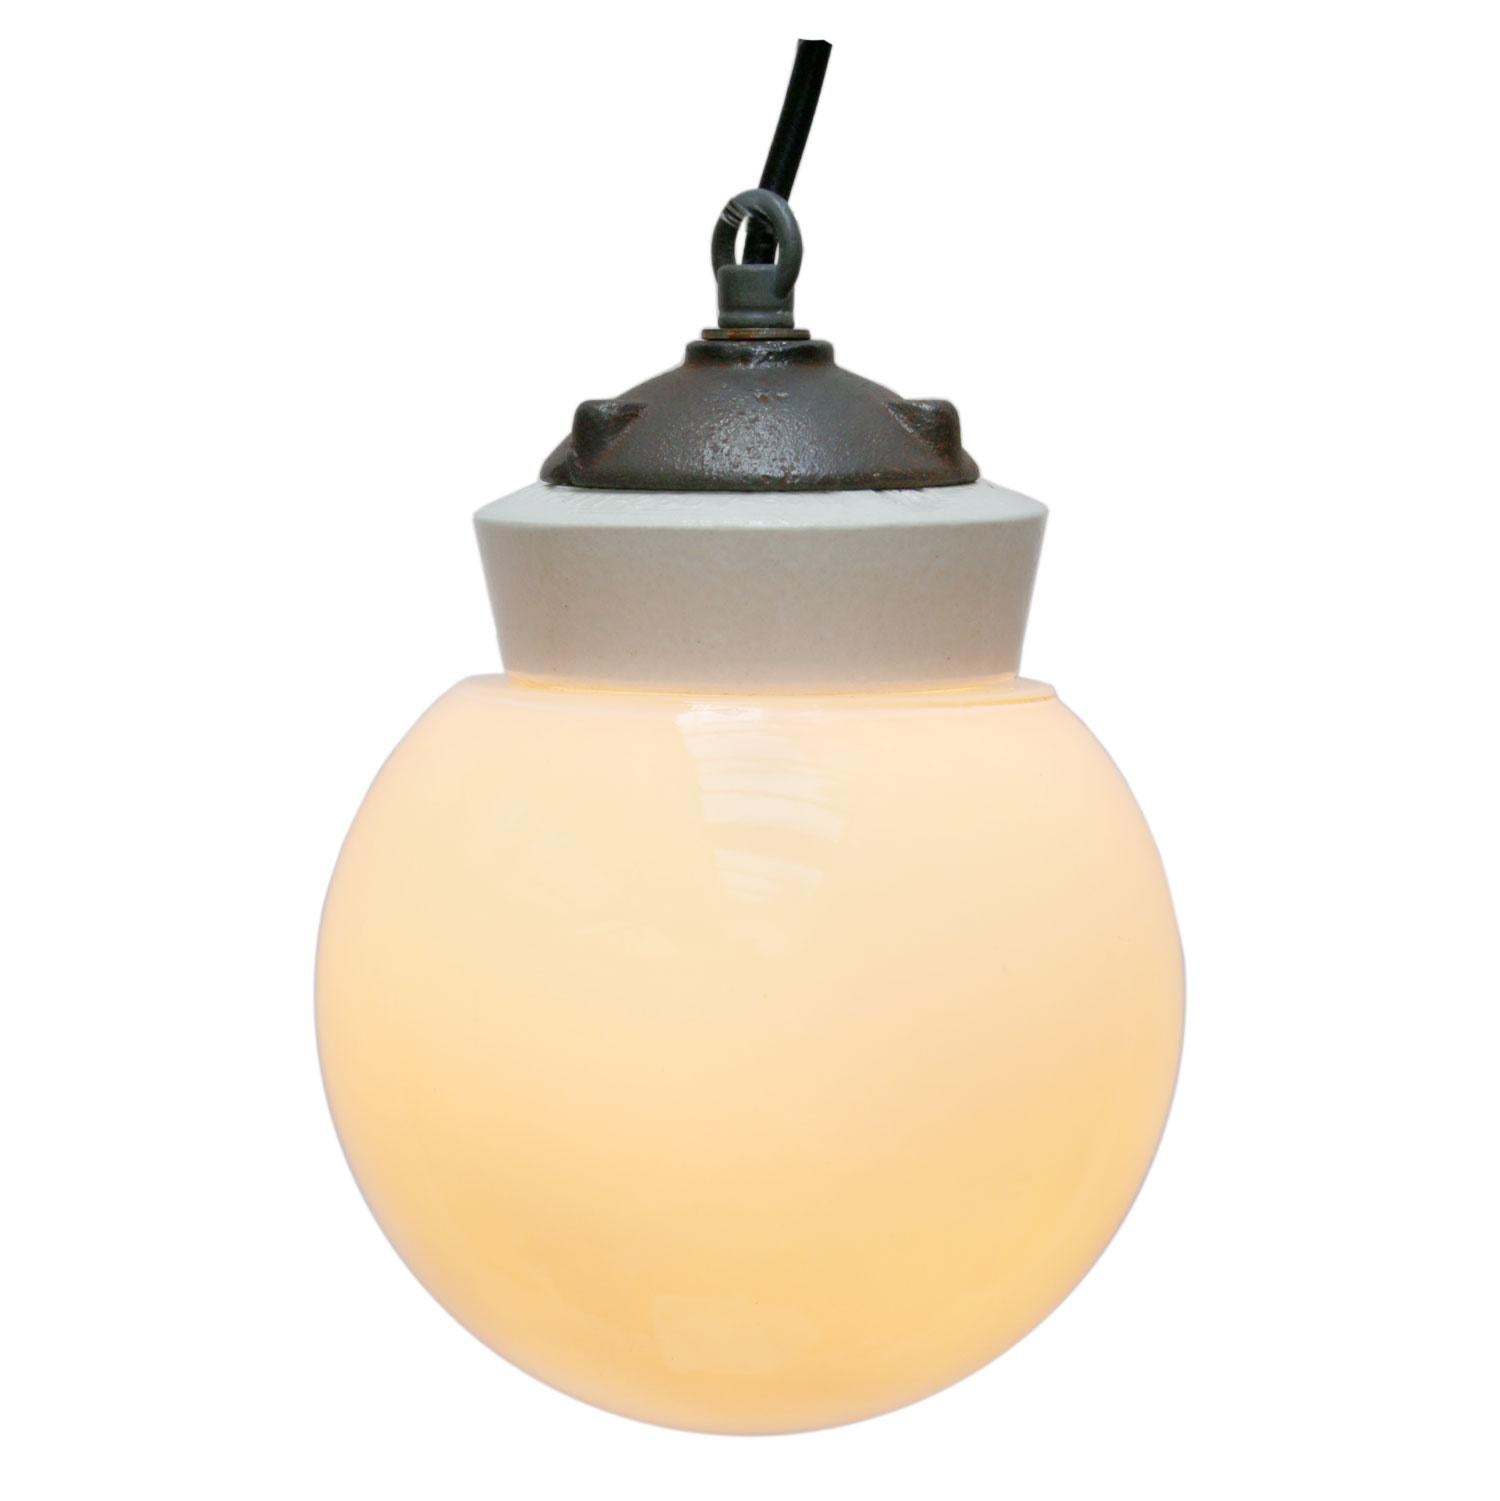 Porcelain Industrial hanging lamp. White porcelain. Cast iron and white Opaline glass.
Two conductors. No ground.

Weight: 1.7 kg / 3.7 lb

Priced per individual item. All lamps have been made suitable by international standards for incandescent